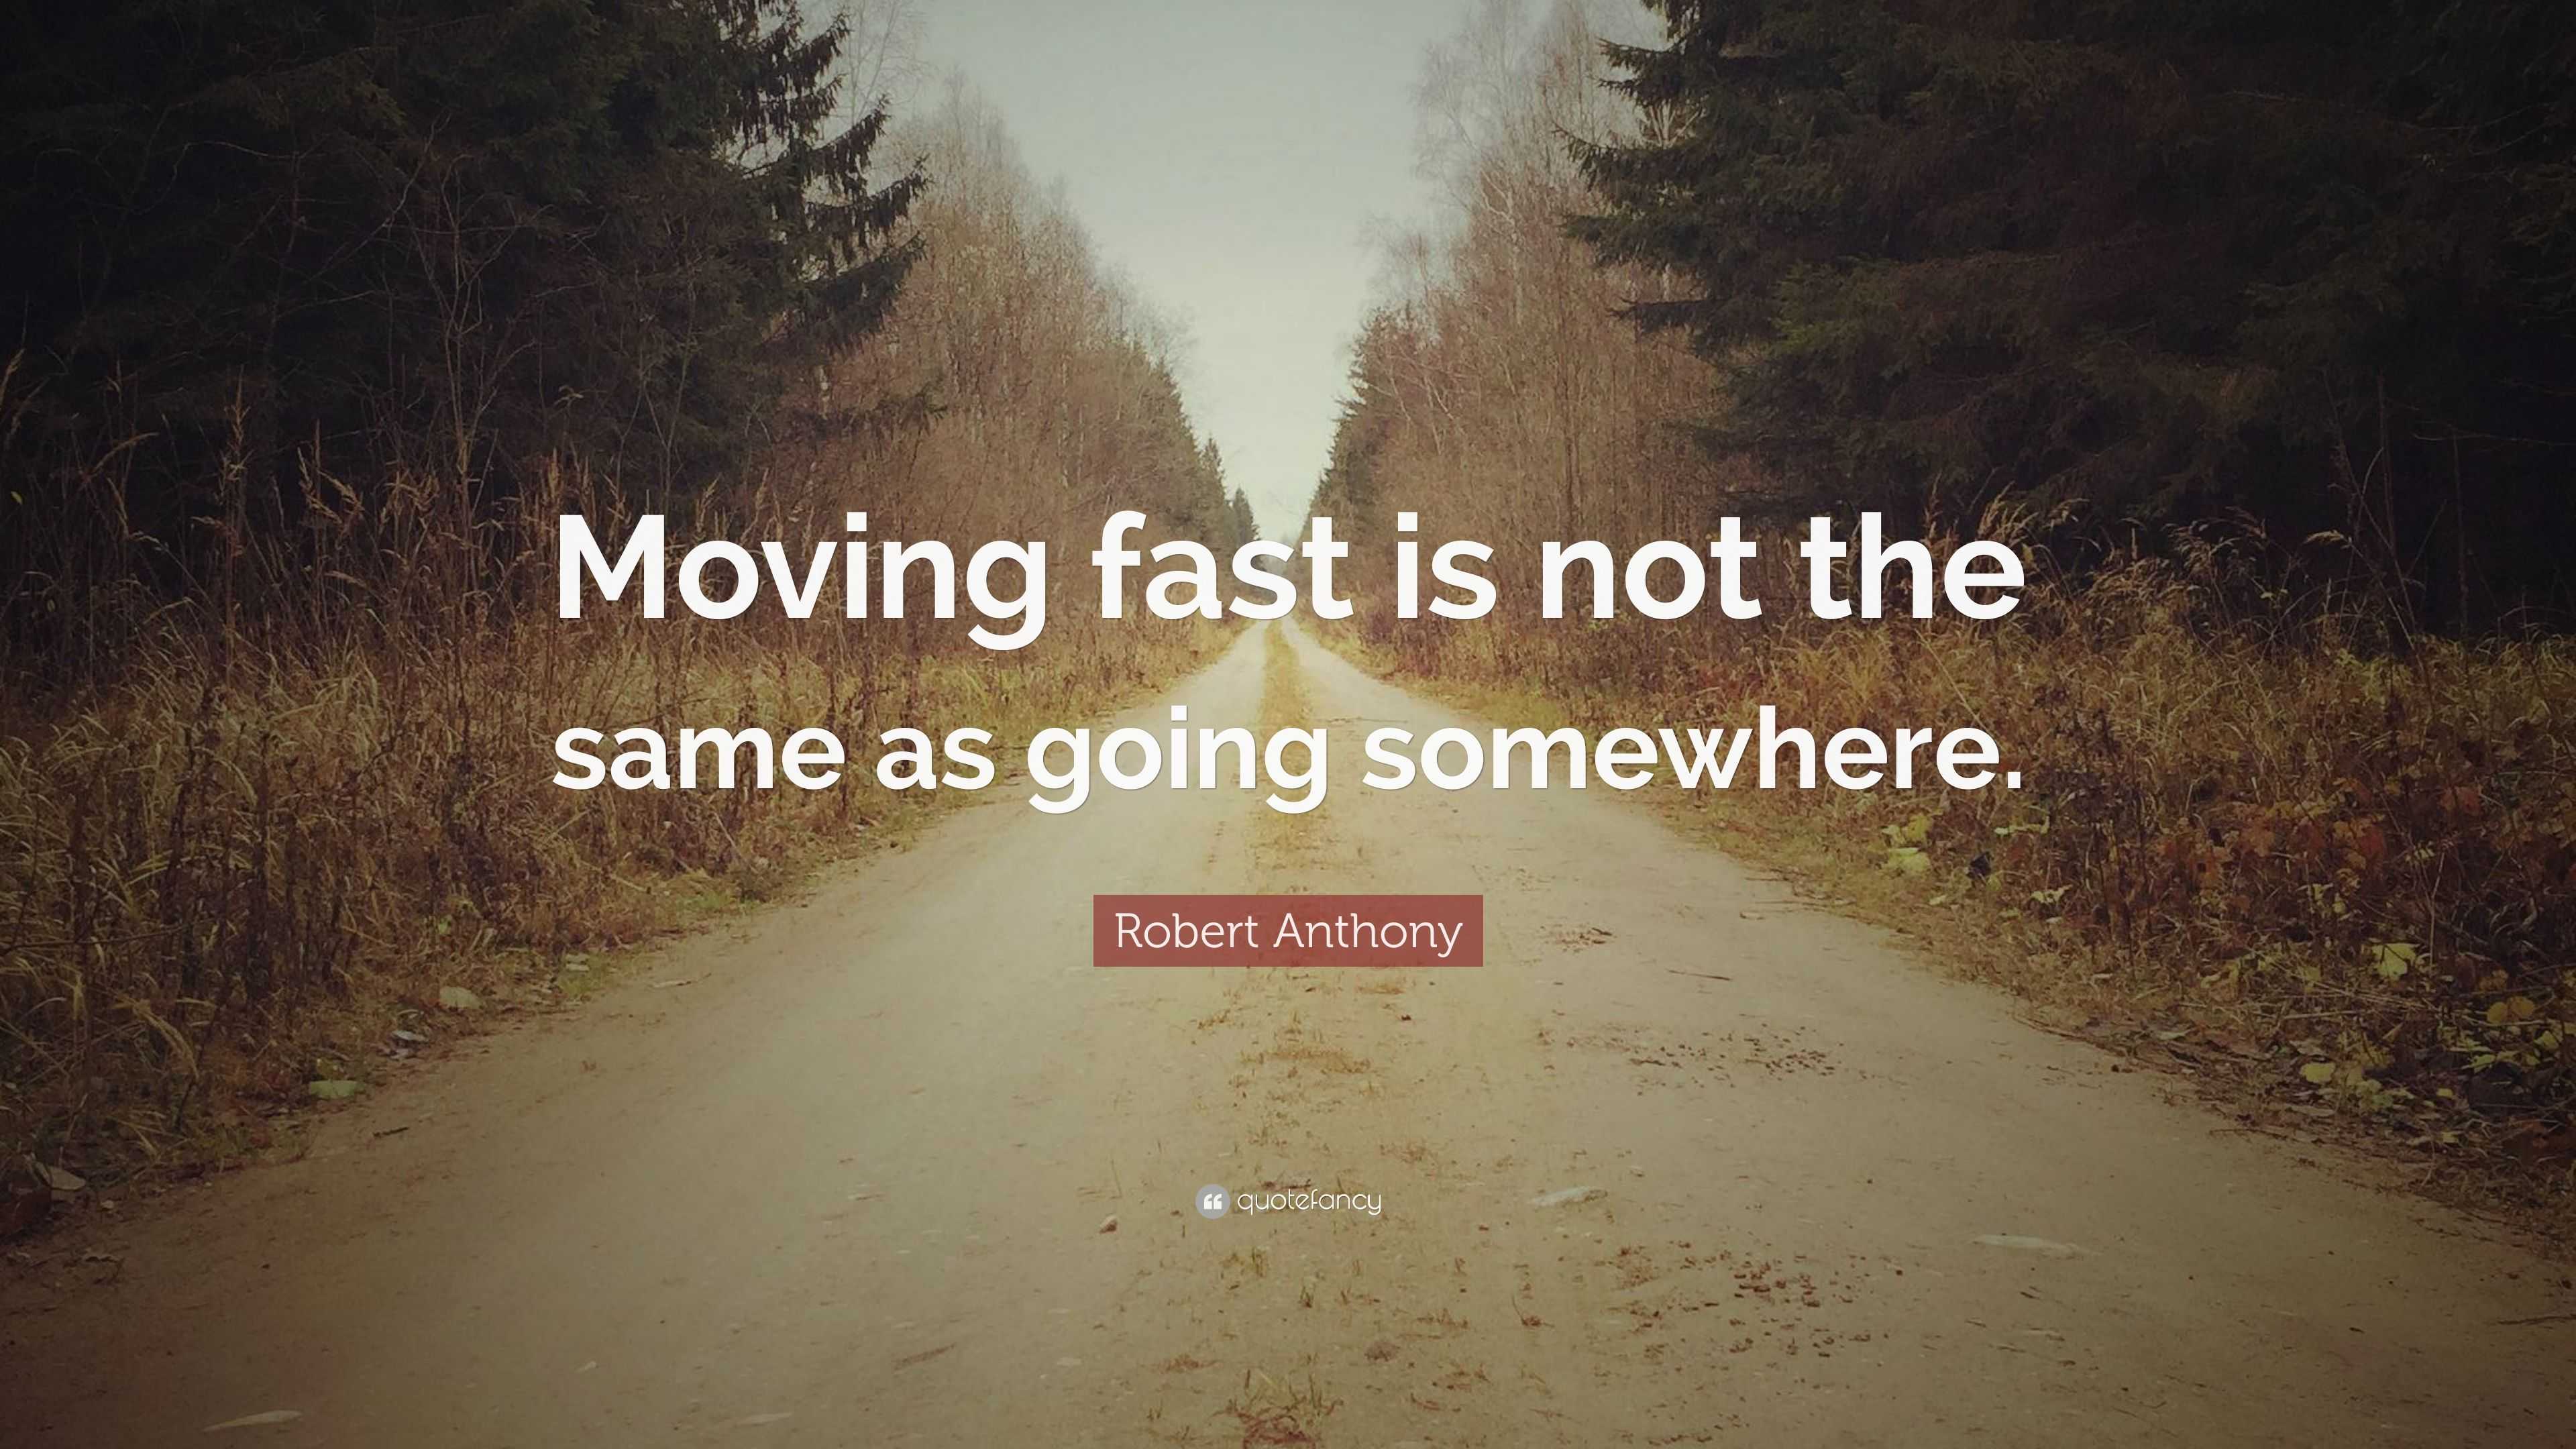 Robert Anthony Quote “Moving fast is not the same as going somewhere.”